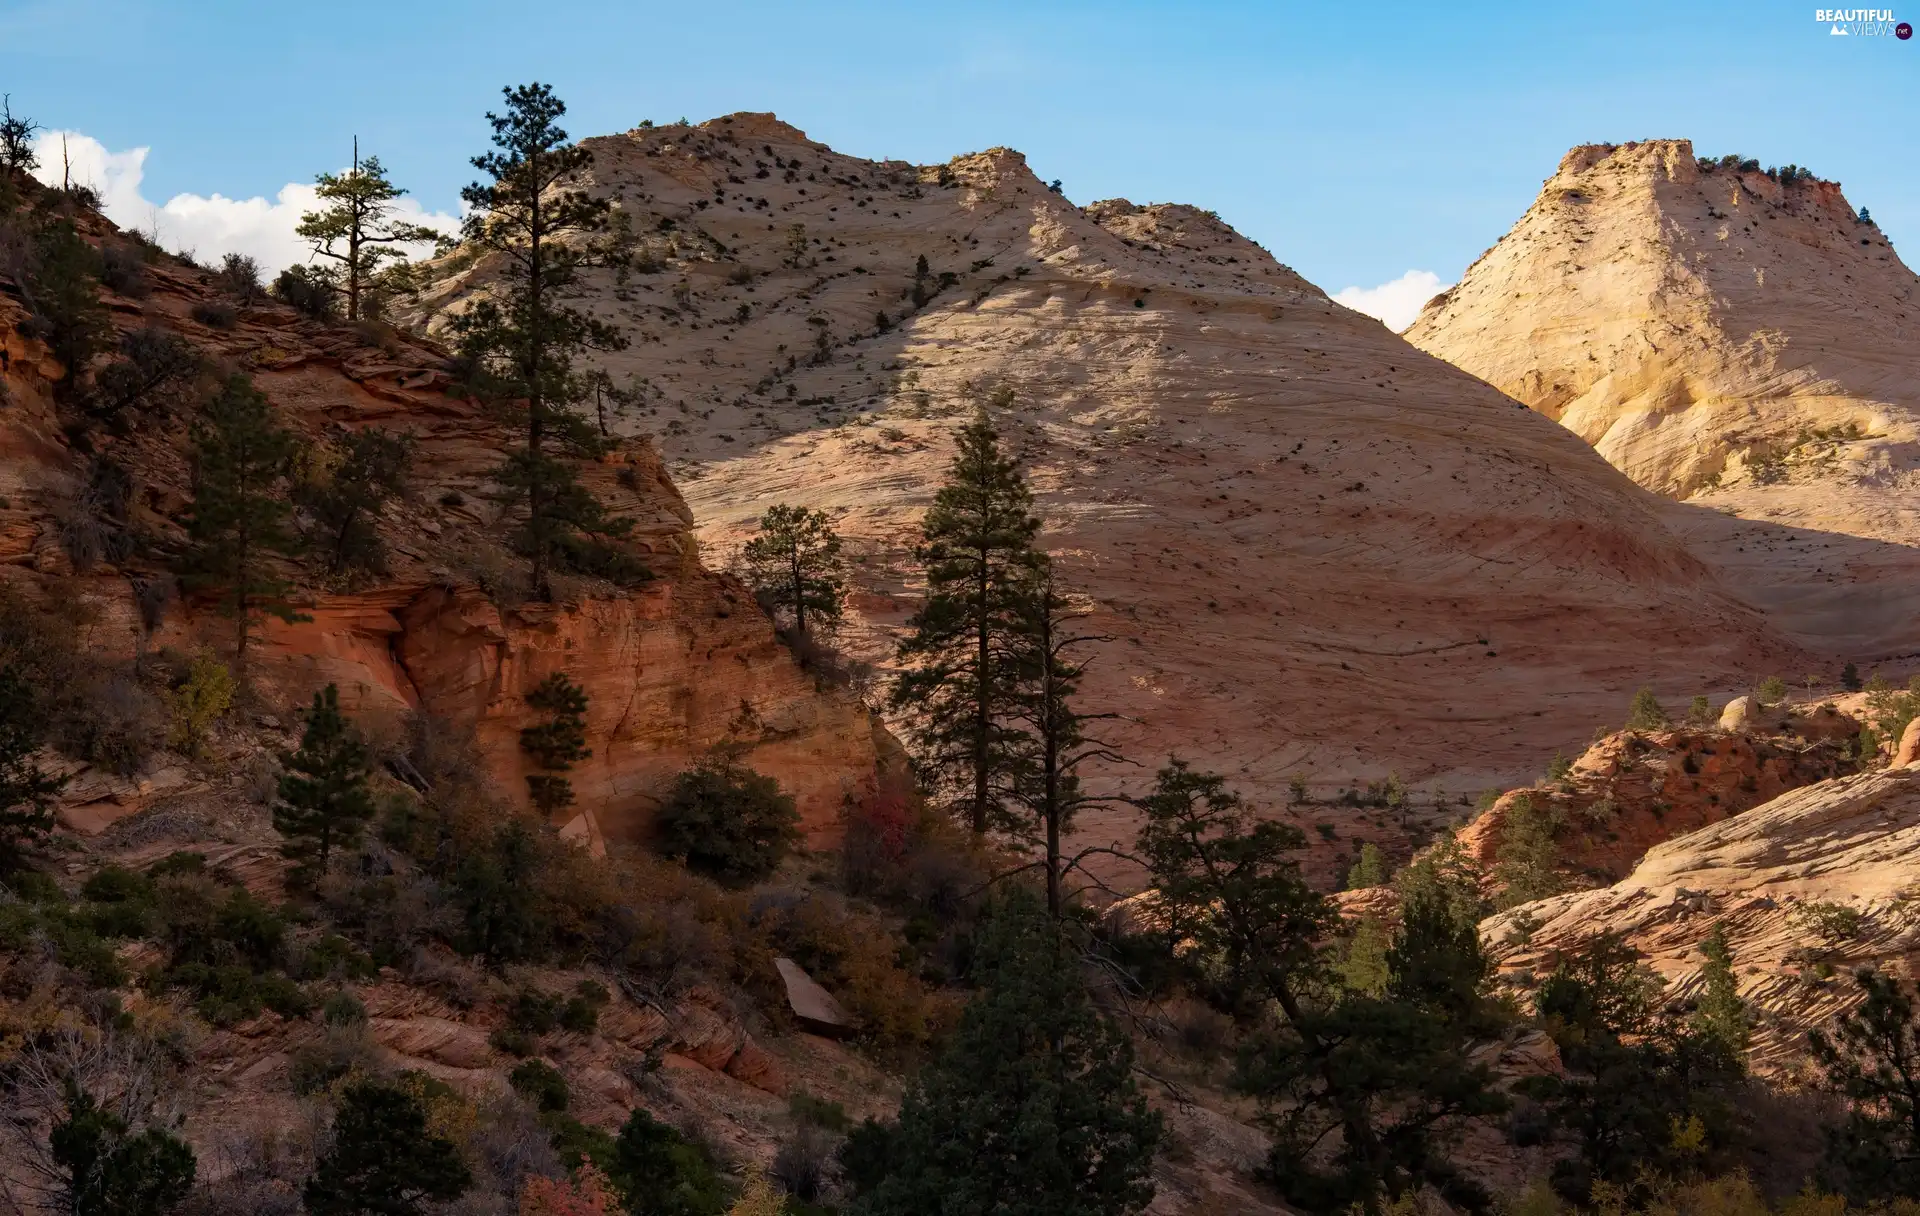 Mountains, trees, Utah State, viewes, Zion National Park, rocks, The United States